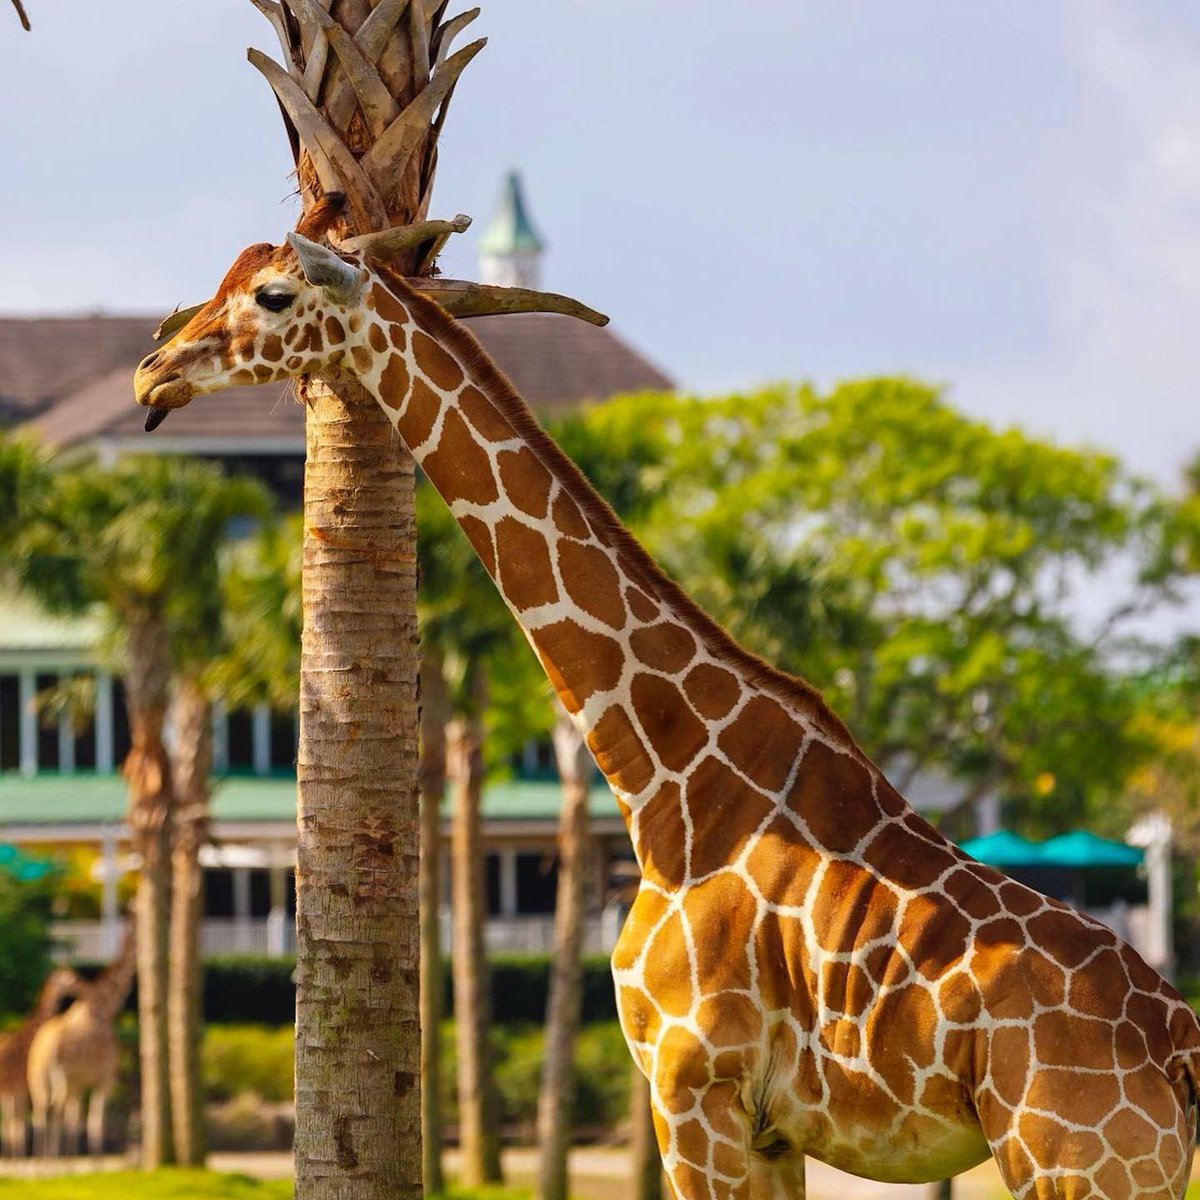 There's millions of ways to play in Tampa Bay. @BuschGardens, @floridaaquarium, and @ZooTampa at Lowry Park welcome guests into a variety of award-winning immersive environments that educate and offer  family fun.